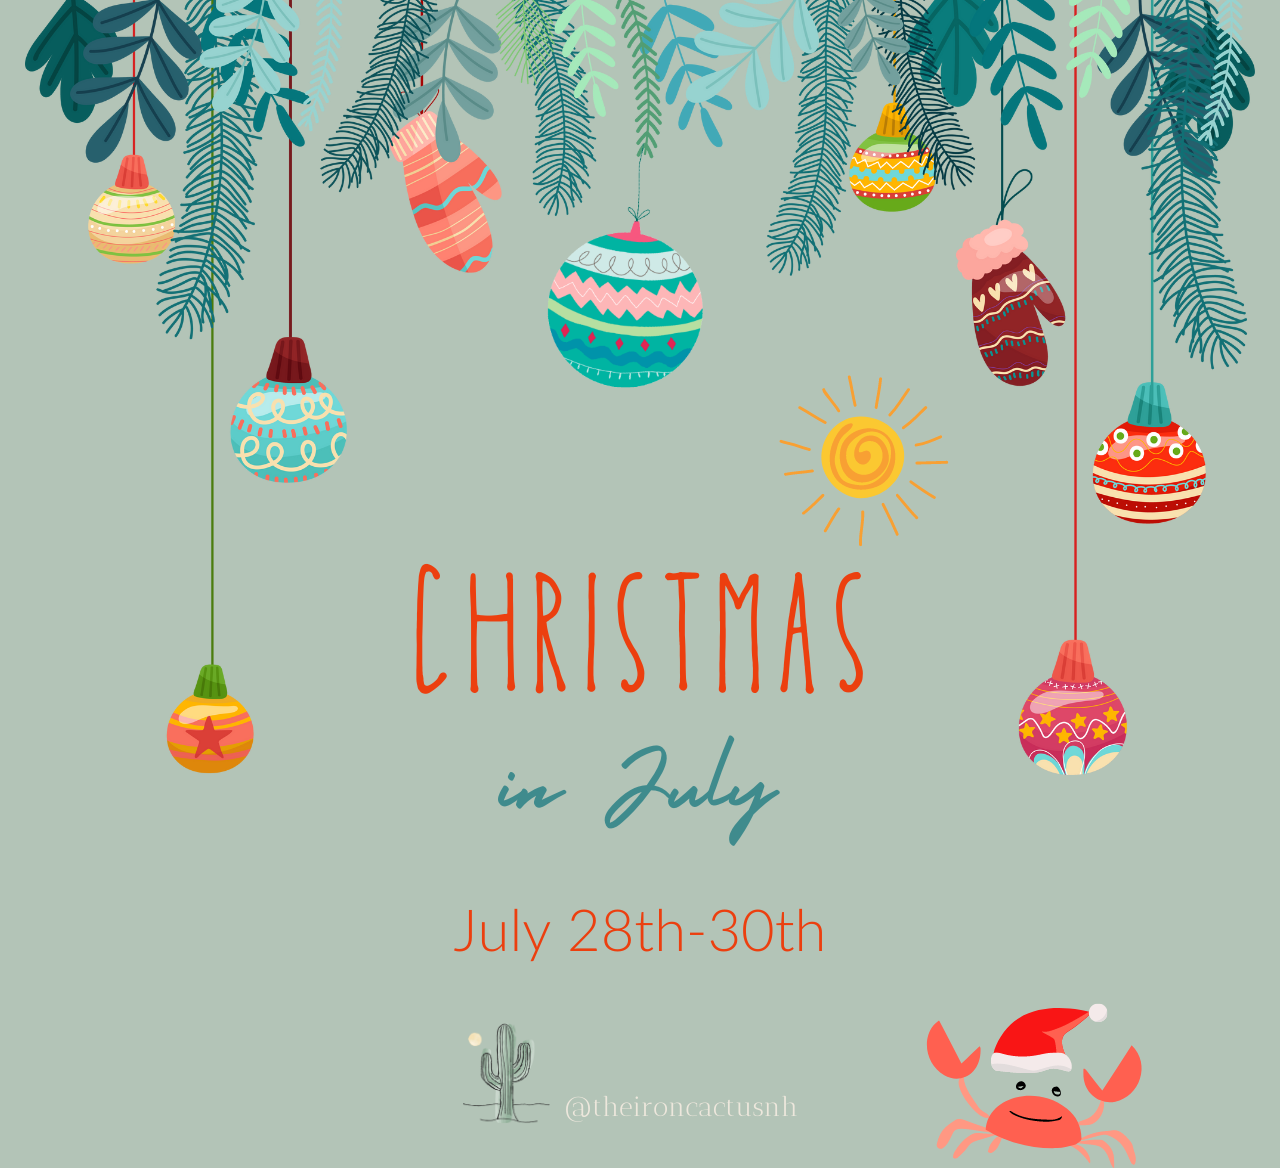 Free* Christmas in July! Friday, July 28 - Sunday, July 30